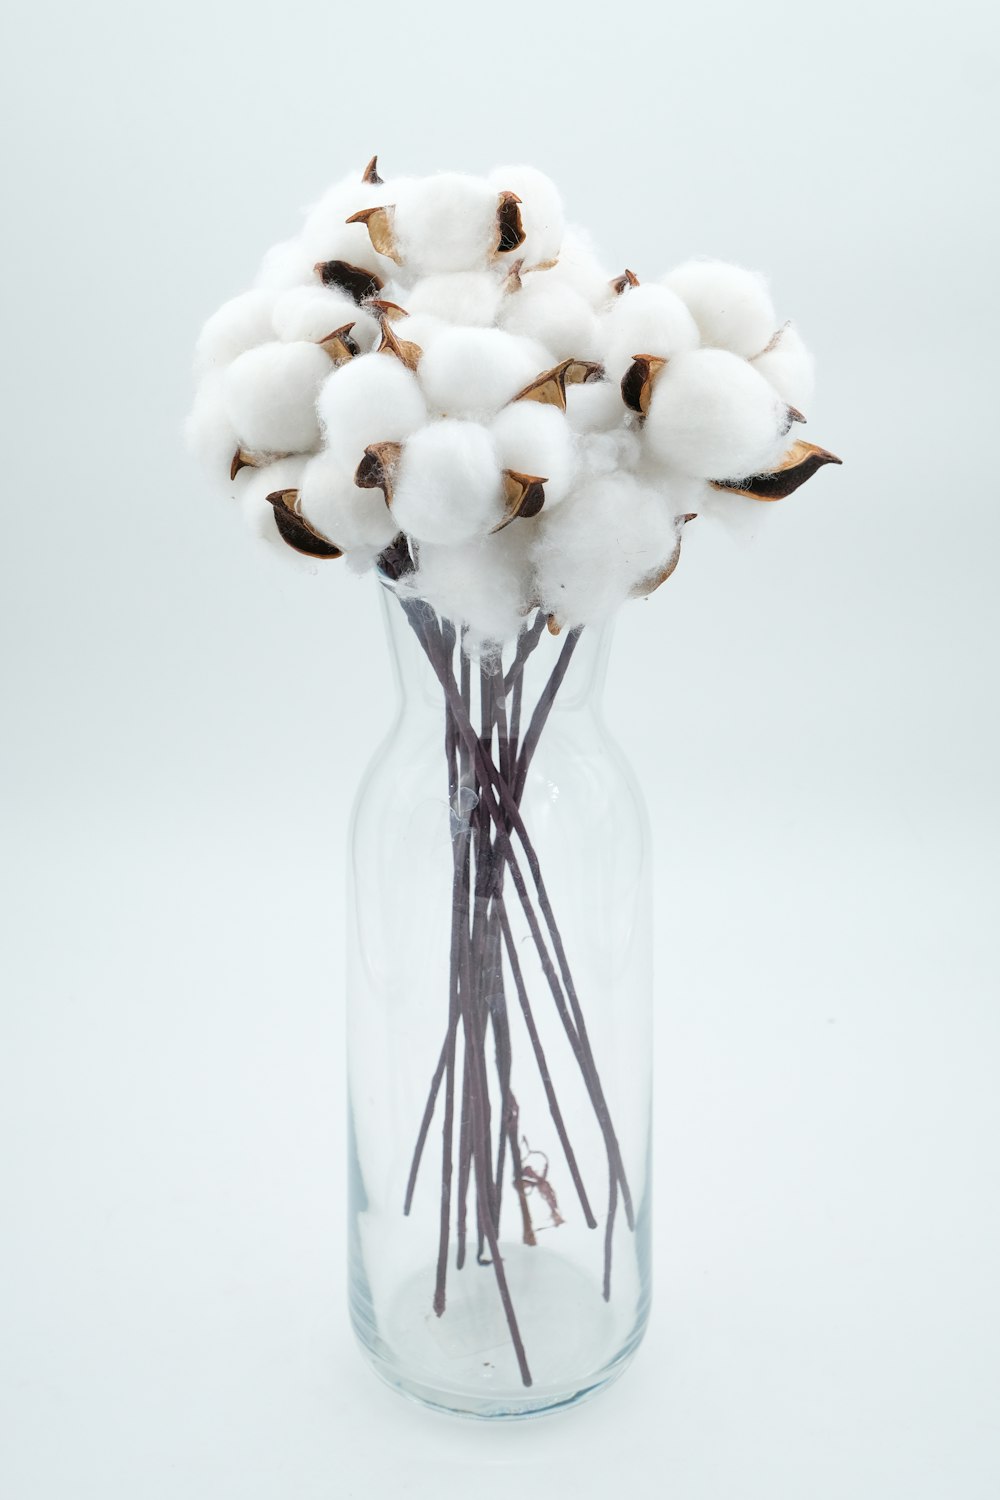 a glass vase filled with cotton stems on a white background